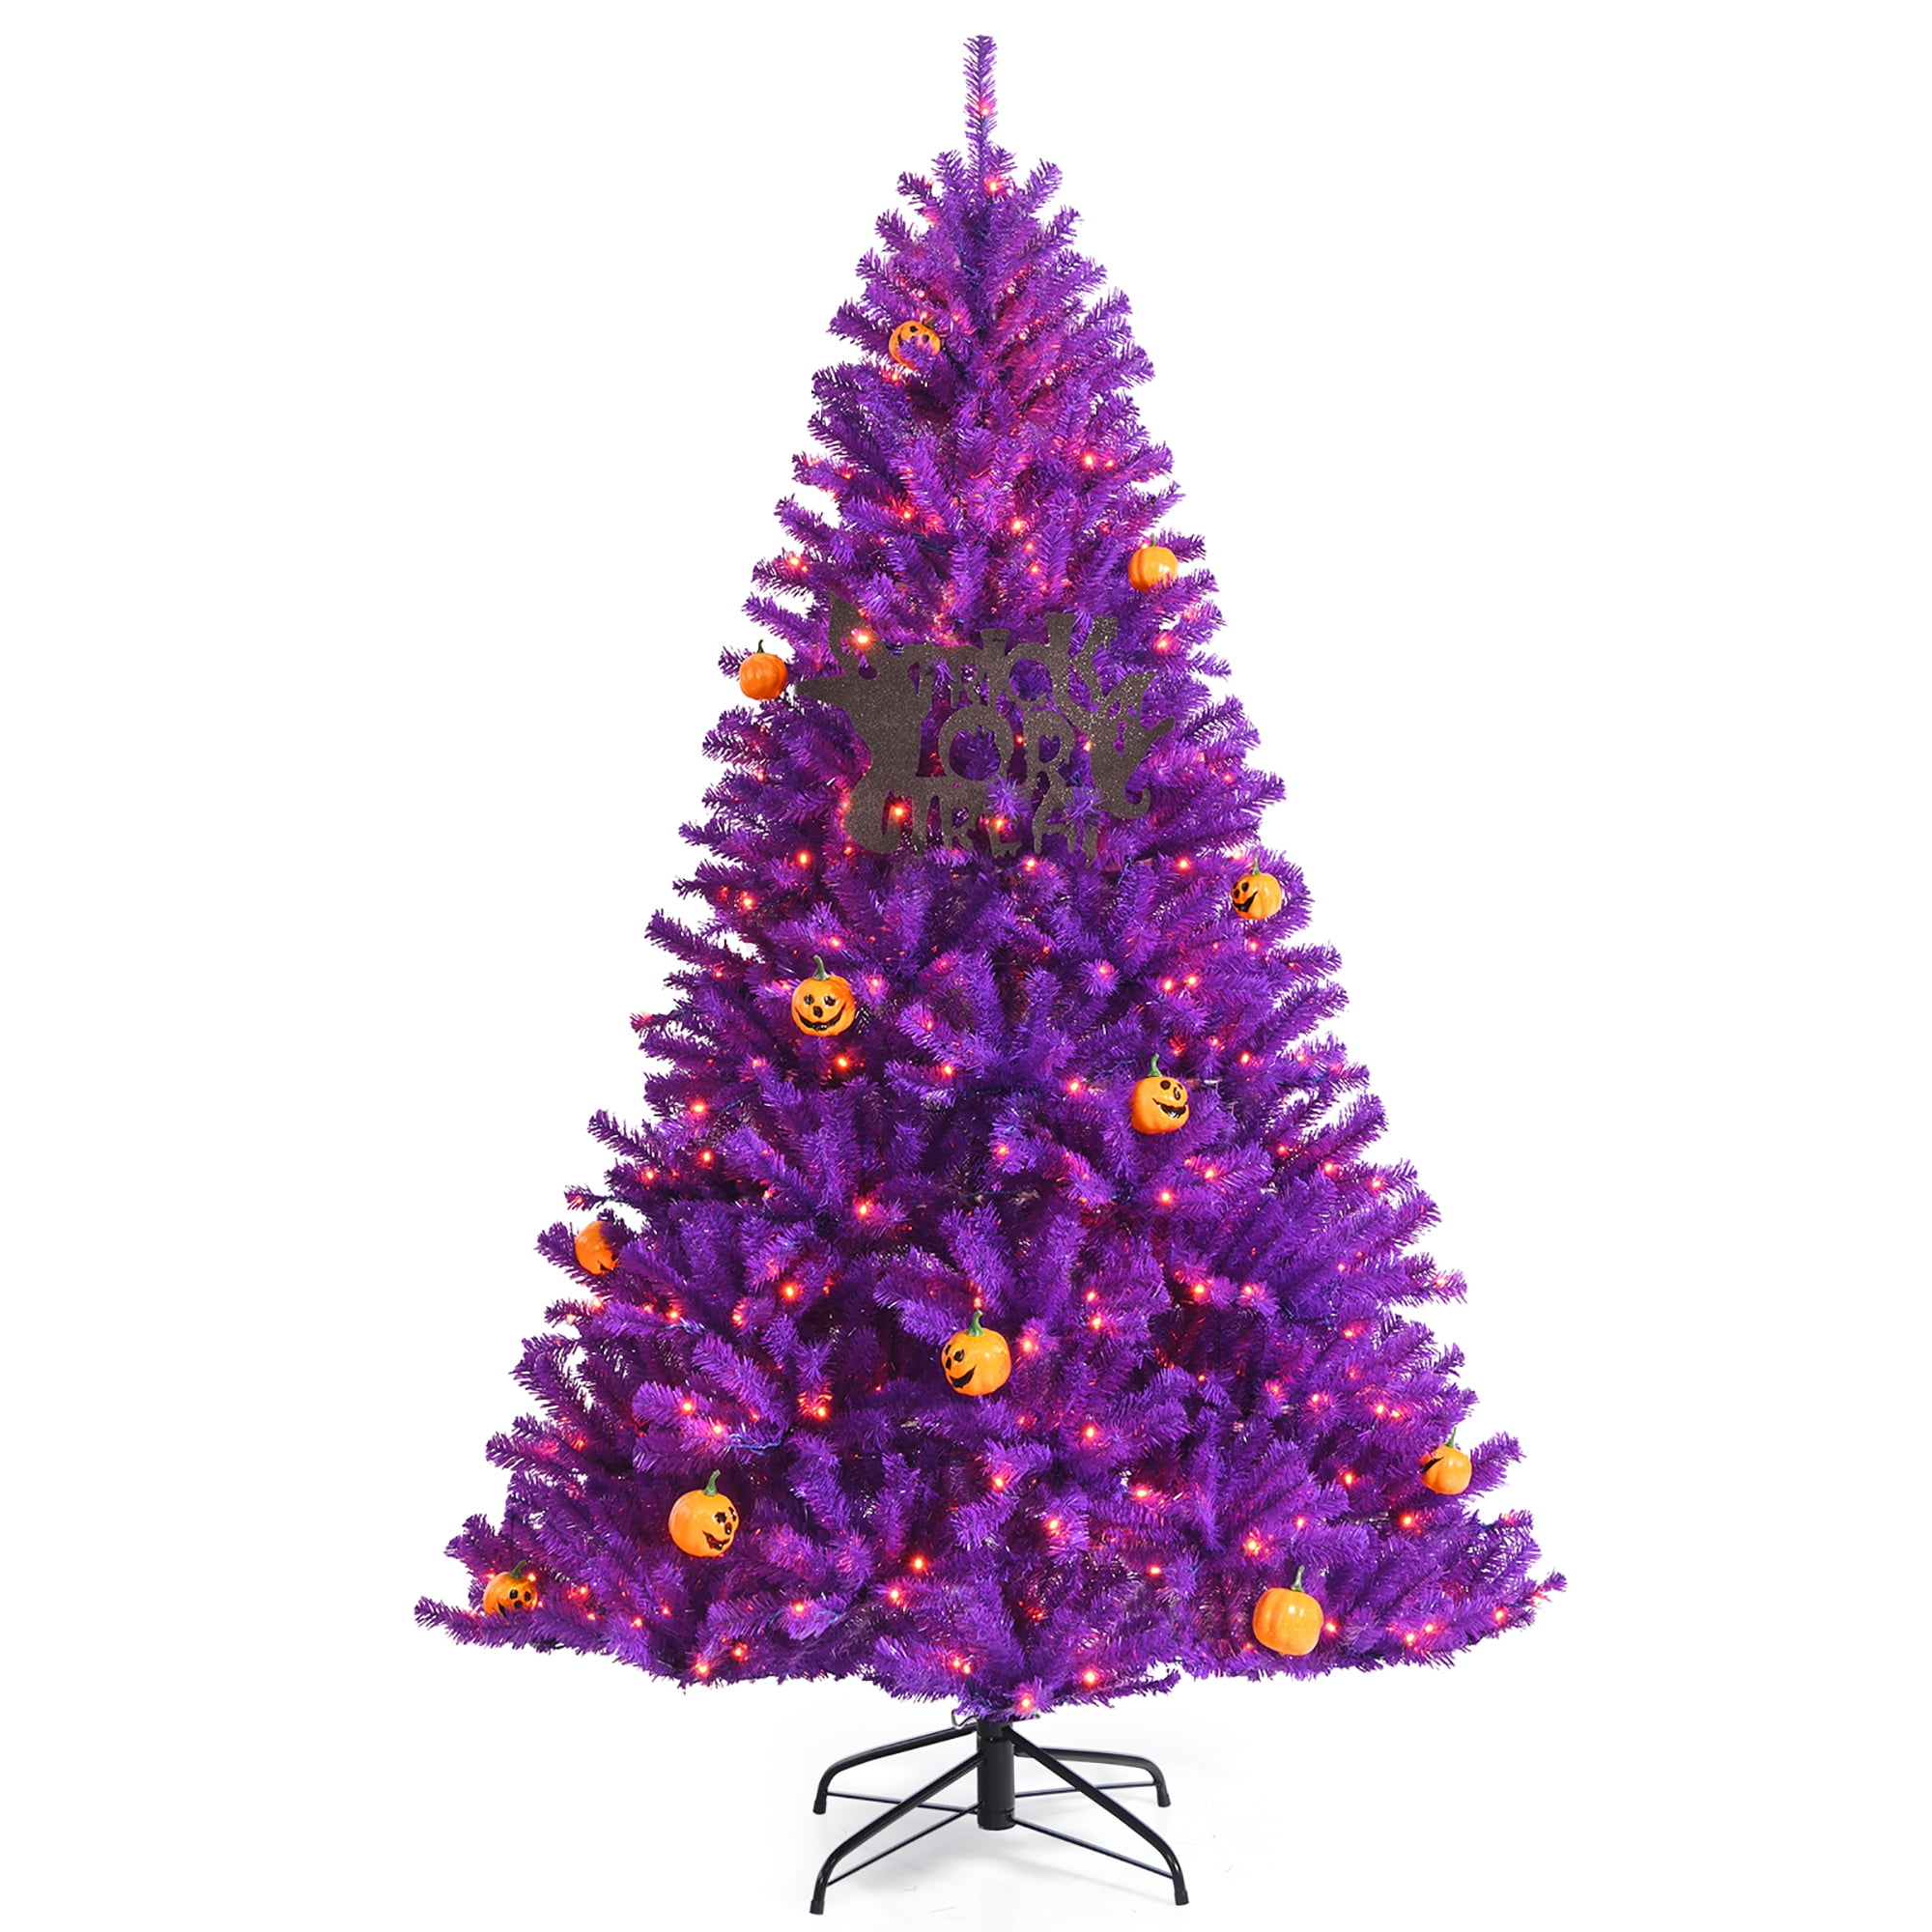 7FT Purple Lighted Birch Tree Lights for Halloween Decoration 150LED Colors Changing Light Up Artificial Tree,Orange Purple LED Tree Lights Branches for Christmas Home Garden Indoor Outdoor Decor